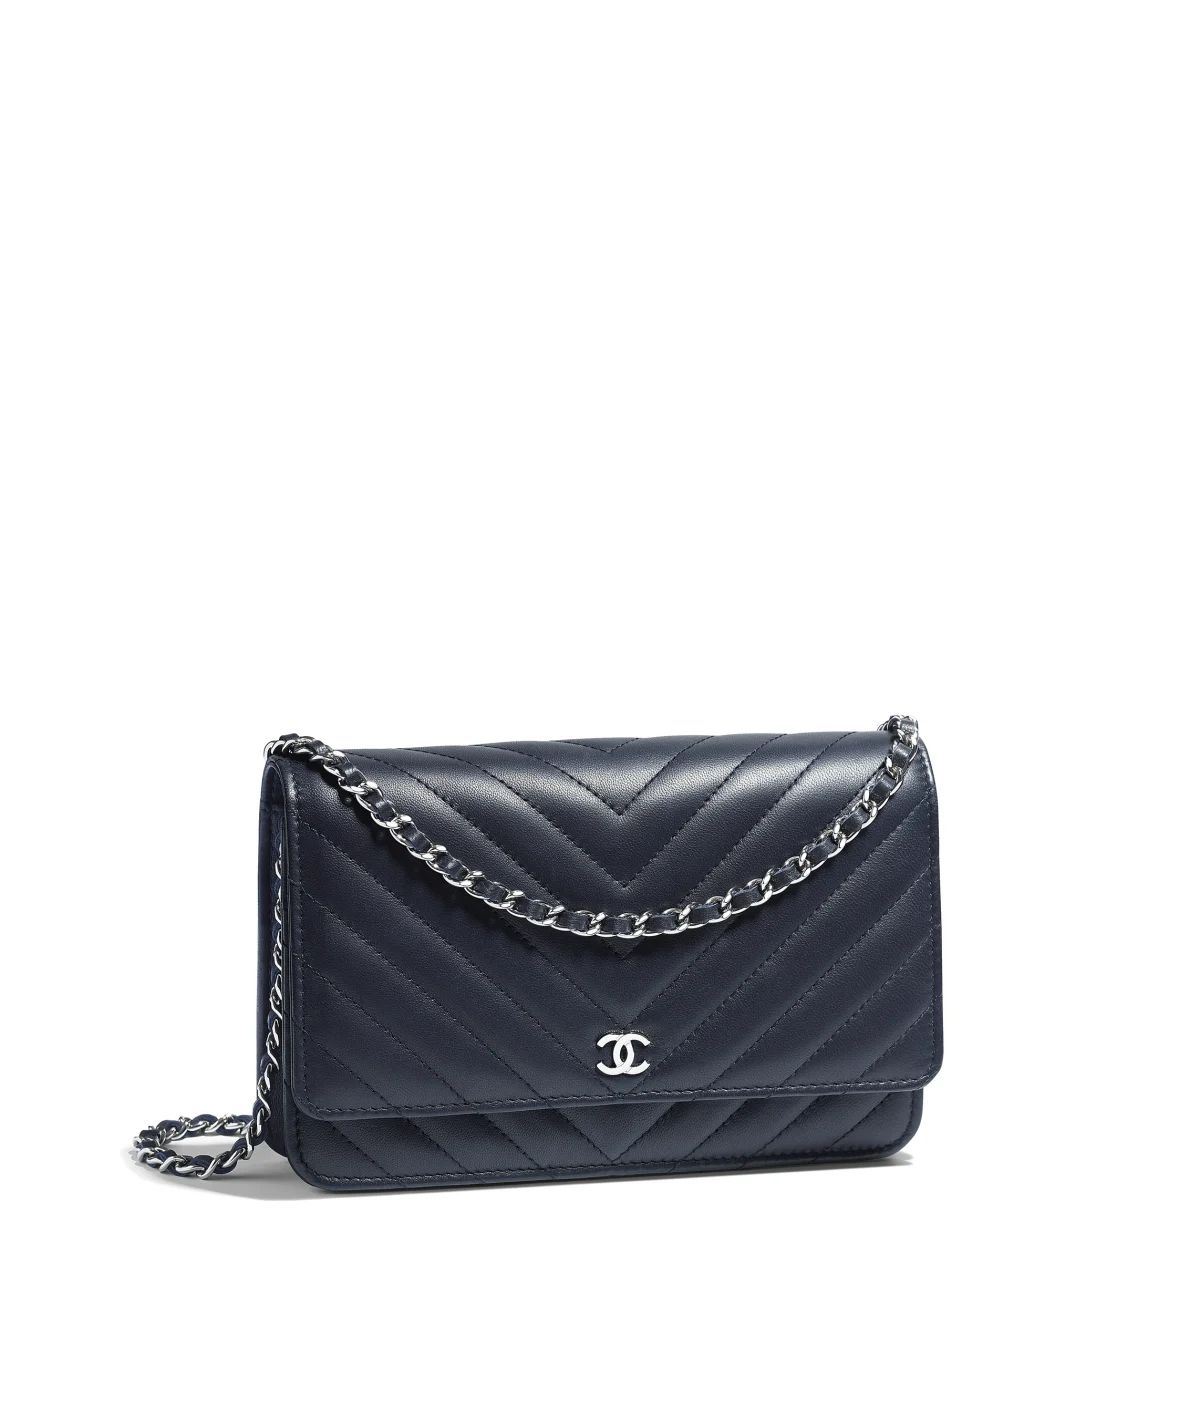 Classic Wallet on Chain, lambskin & silver-tone metal, navy blue - CHANEL | Chanel, Inc. (US)